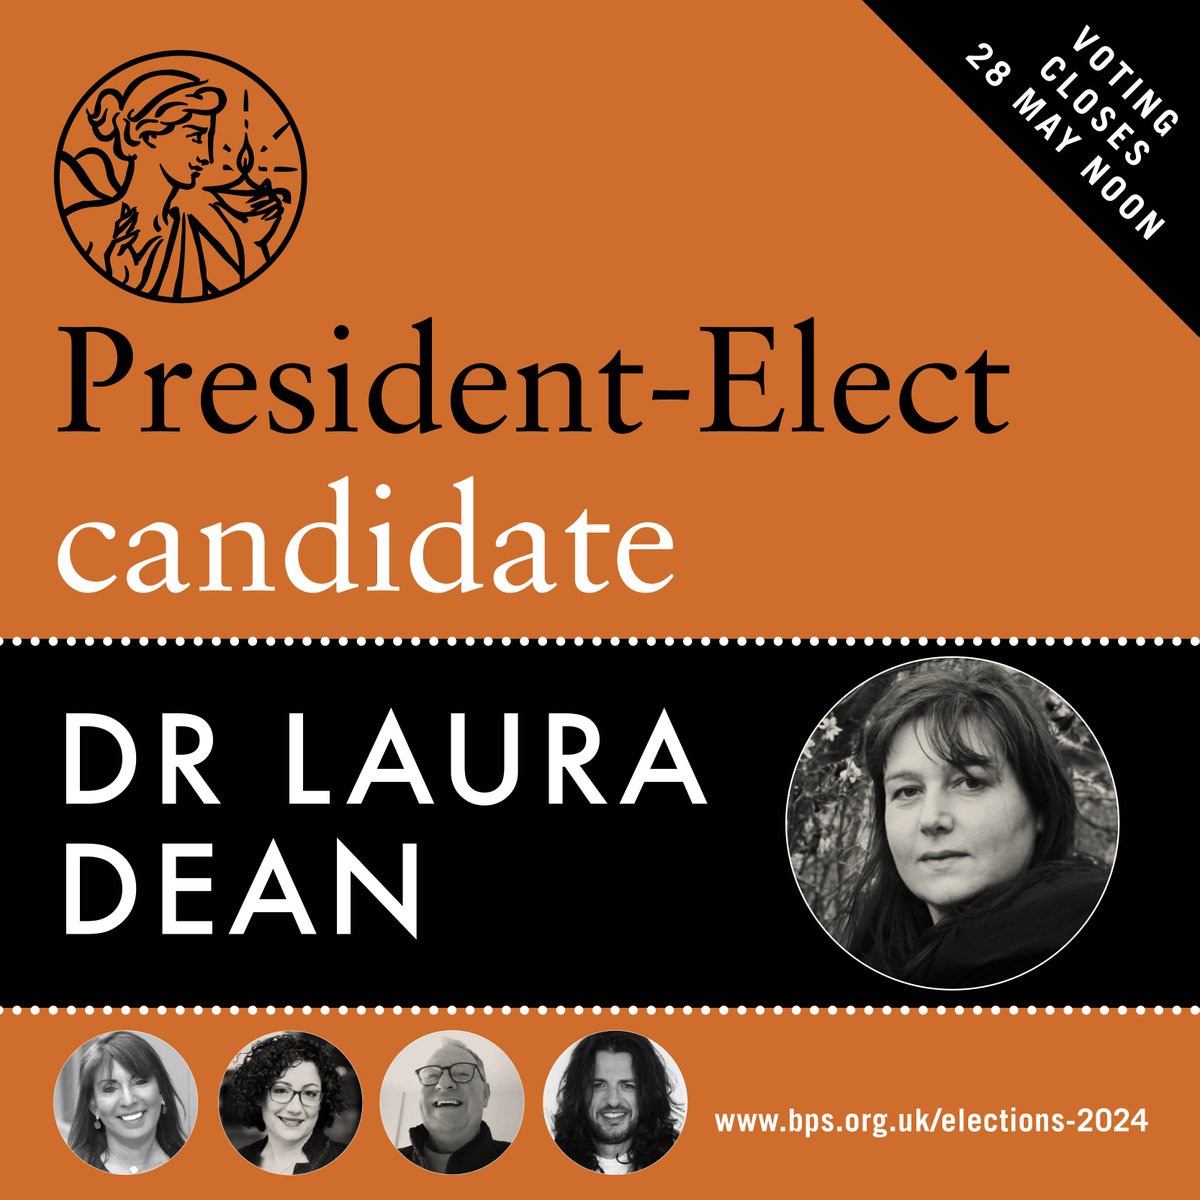 Meet President-Elect candidate, Dr Laura Dean, one of five candidates standing for the role of President-Elect this year. BPS members can now vote for their preferred candidate for the roles of both President-Elect and Elected-Trustee. Meet Laura: bps.org.uk/meet-candidate…